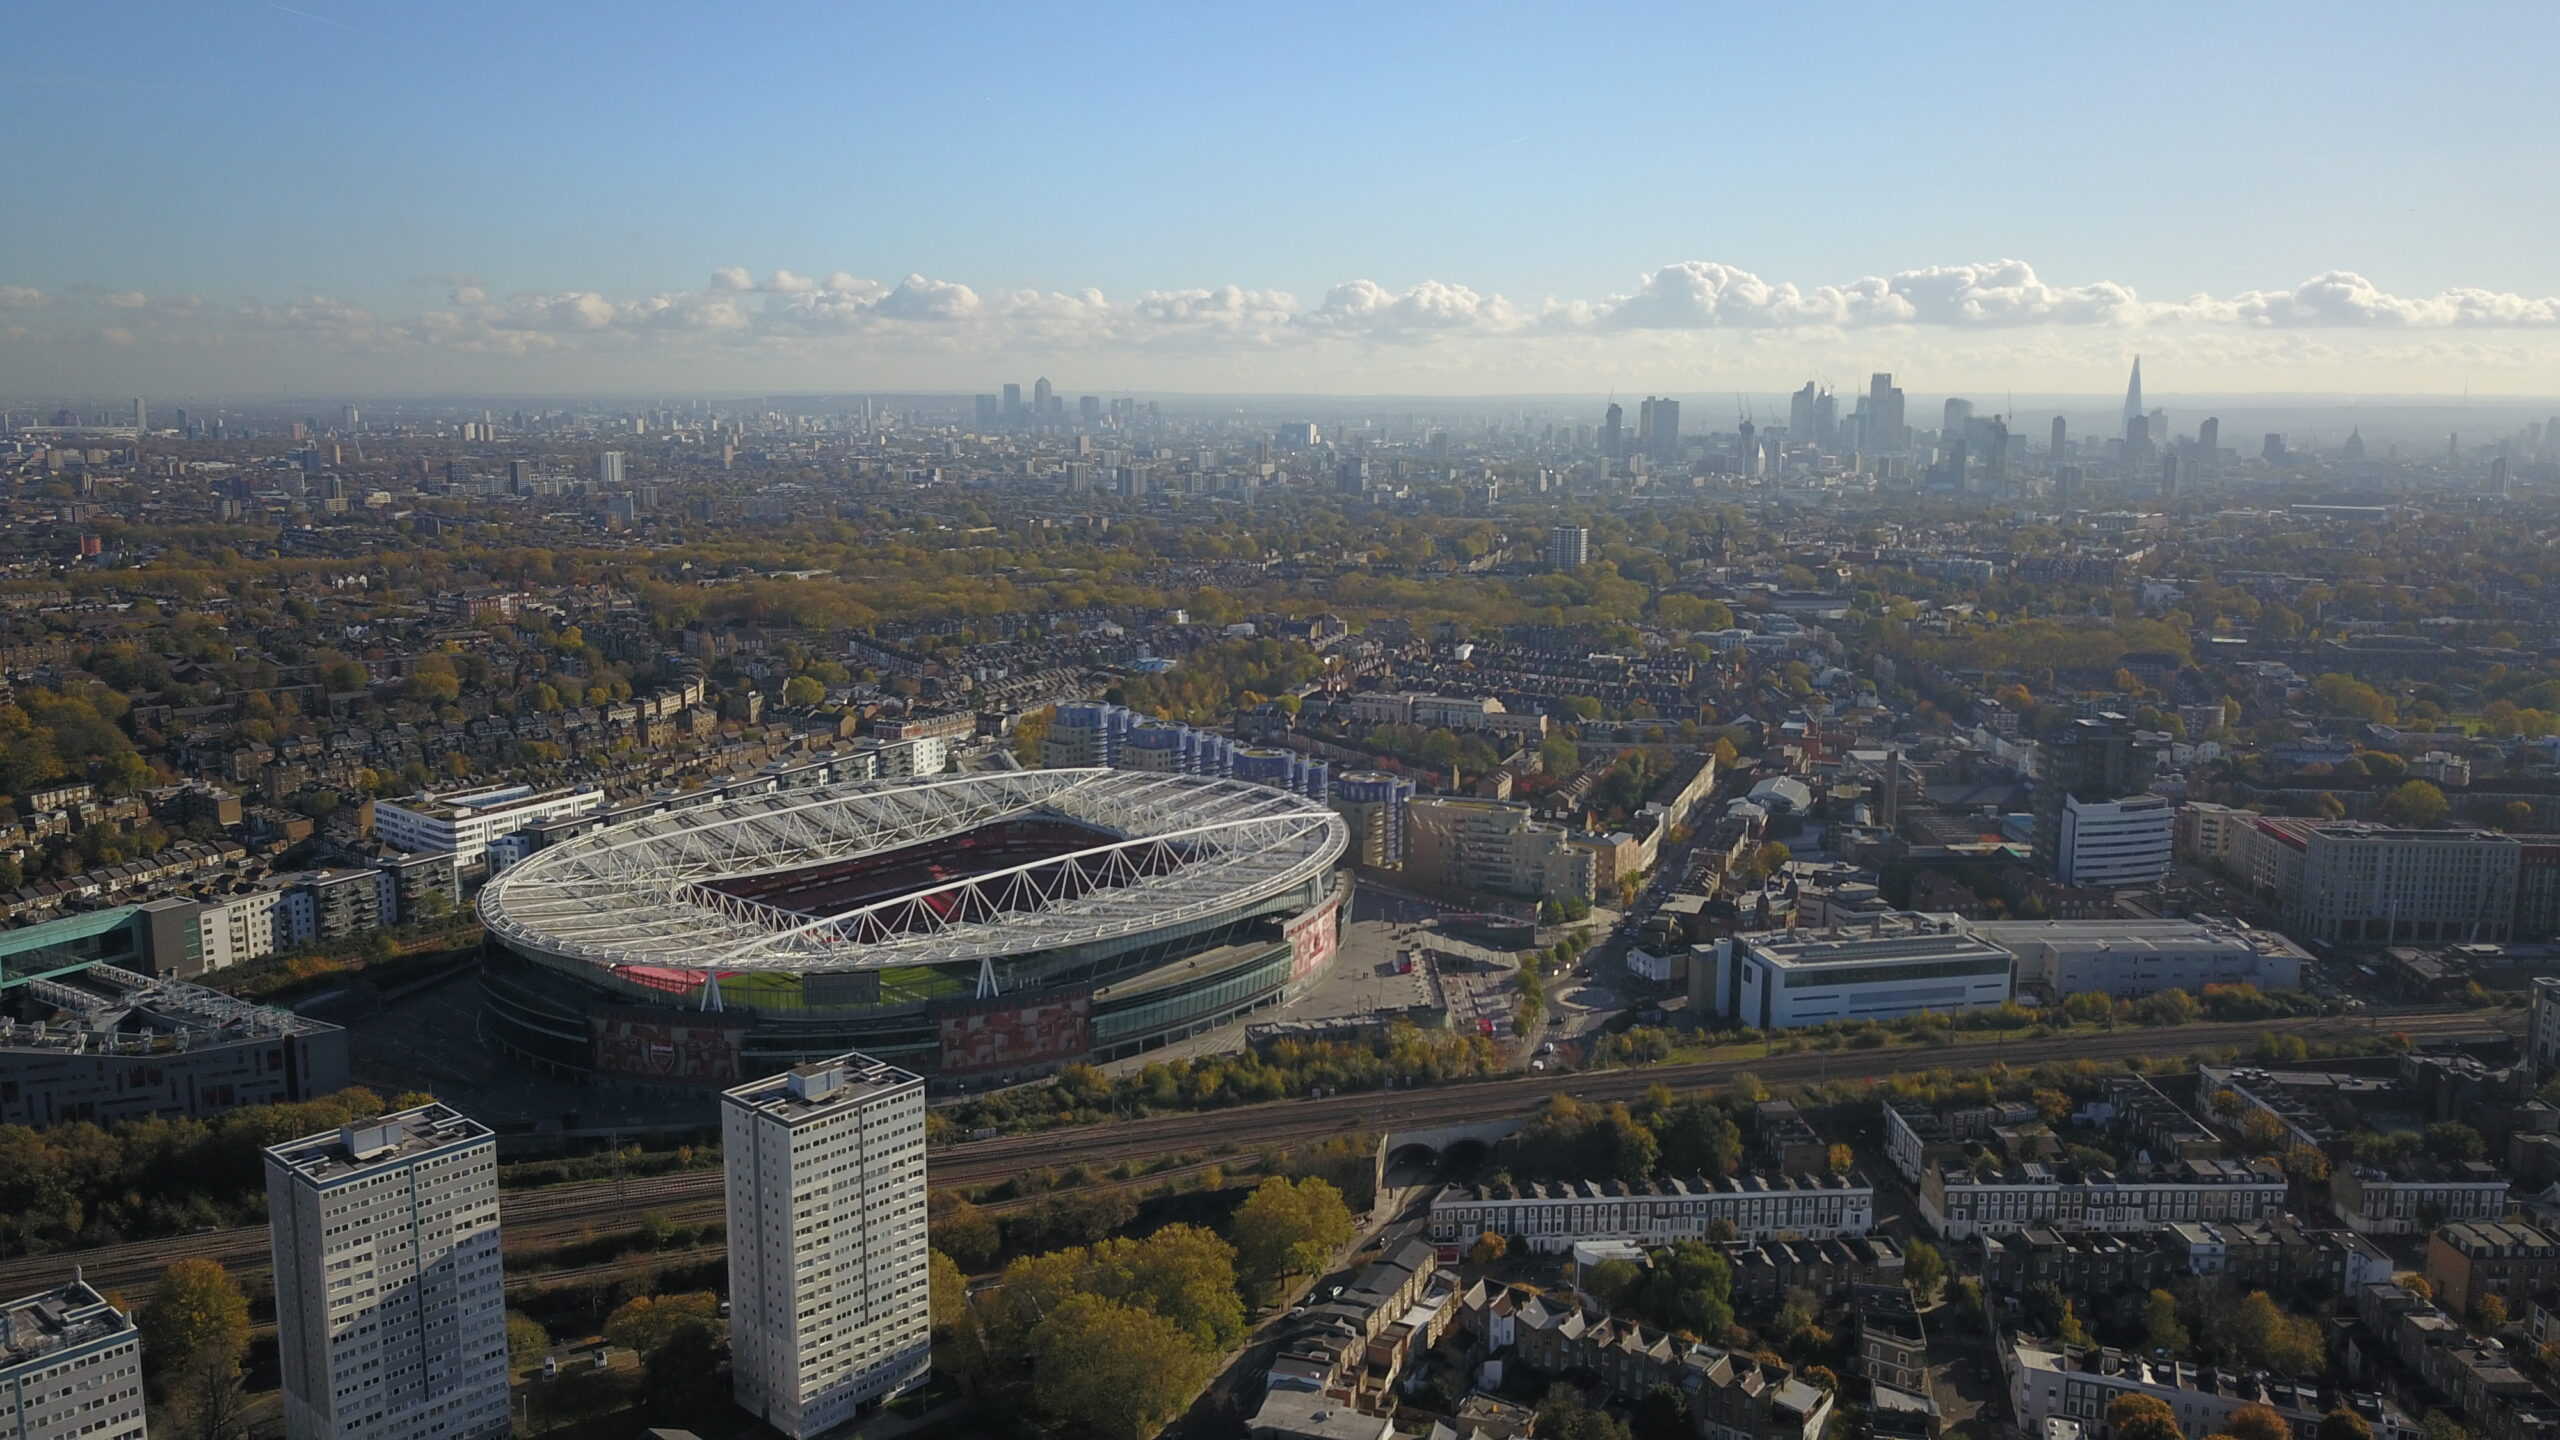 Ariel shot of the Emirates Stadium with the London skyline in the background